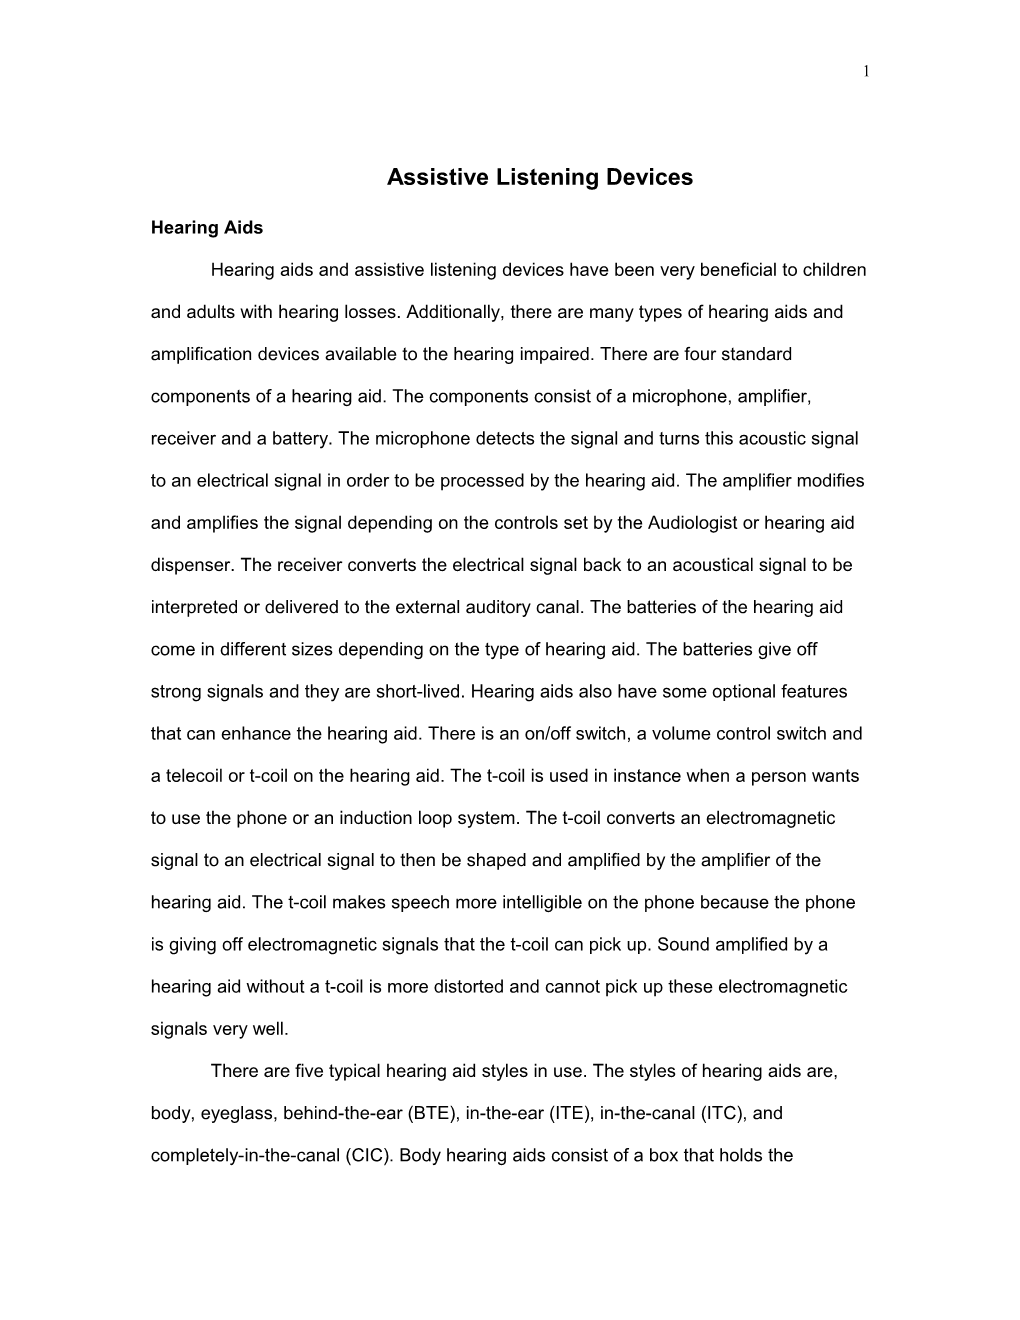 Hearing Aids and Assistive Listening Devices Have Been Very Beneficial to Children And